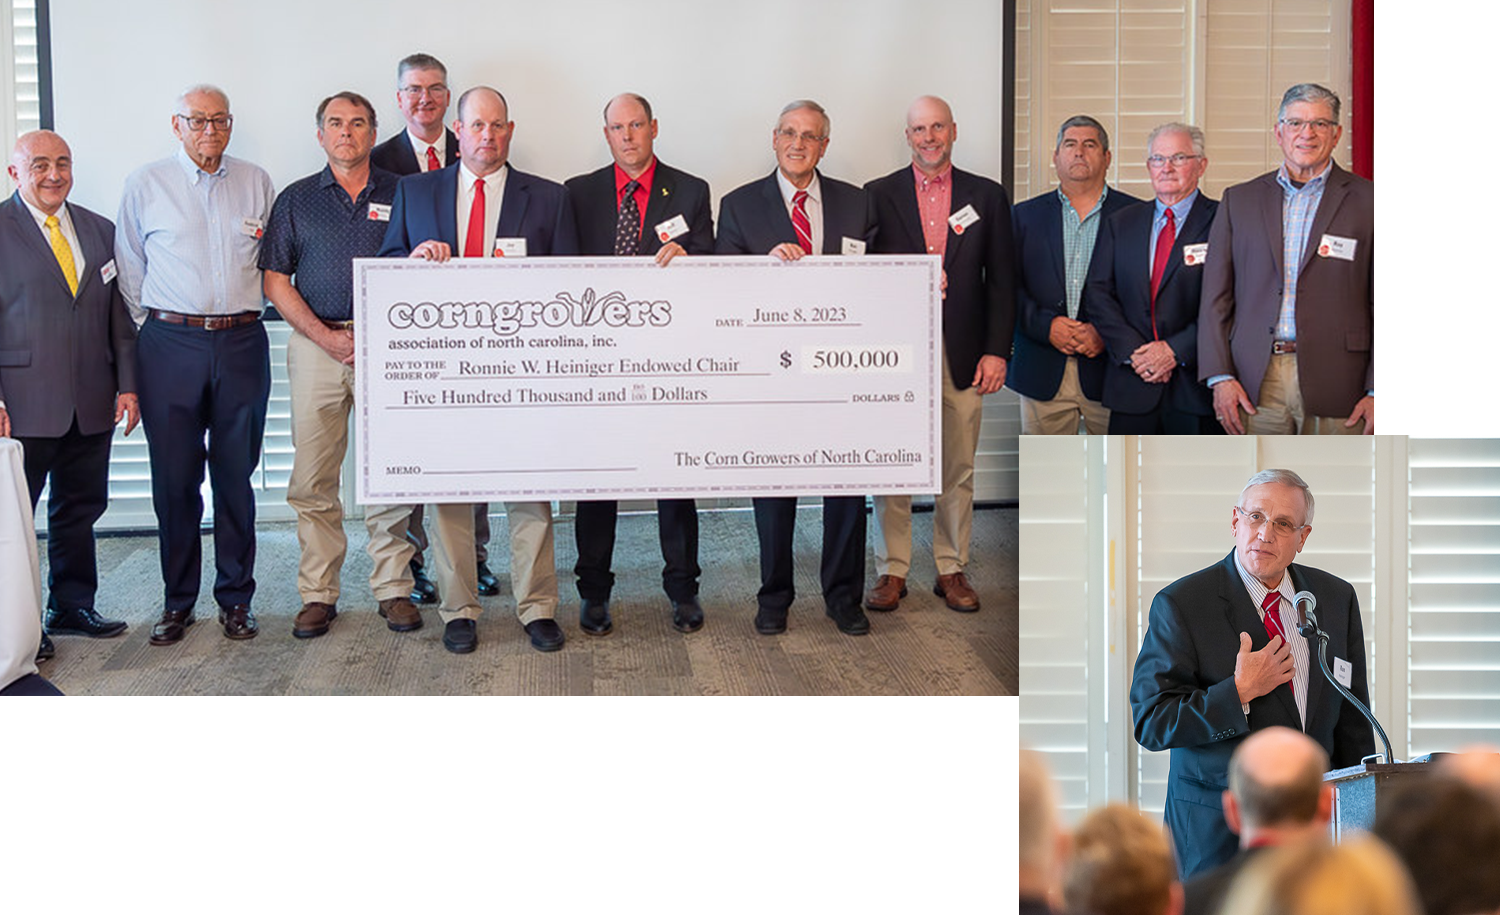 Corn Growers Association of North Carolina representatives present $500,000 check for the Ronnie Heiniger Distinguished Chair, and Ronnie Heineger speaking at the 2023 Kick-off Event